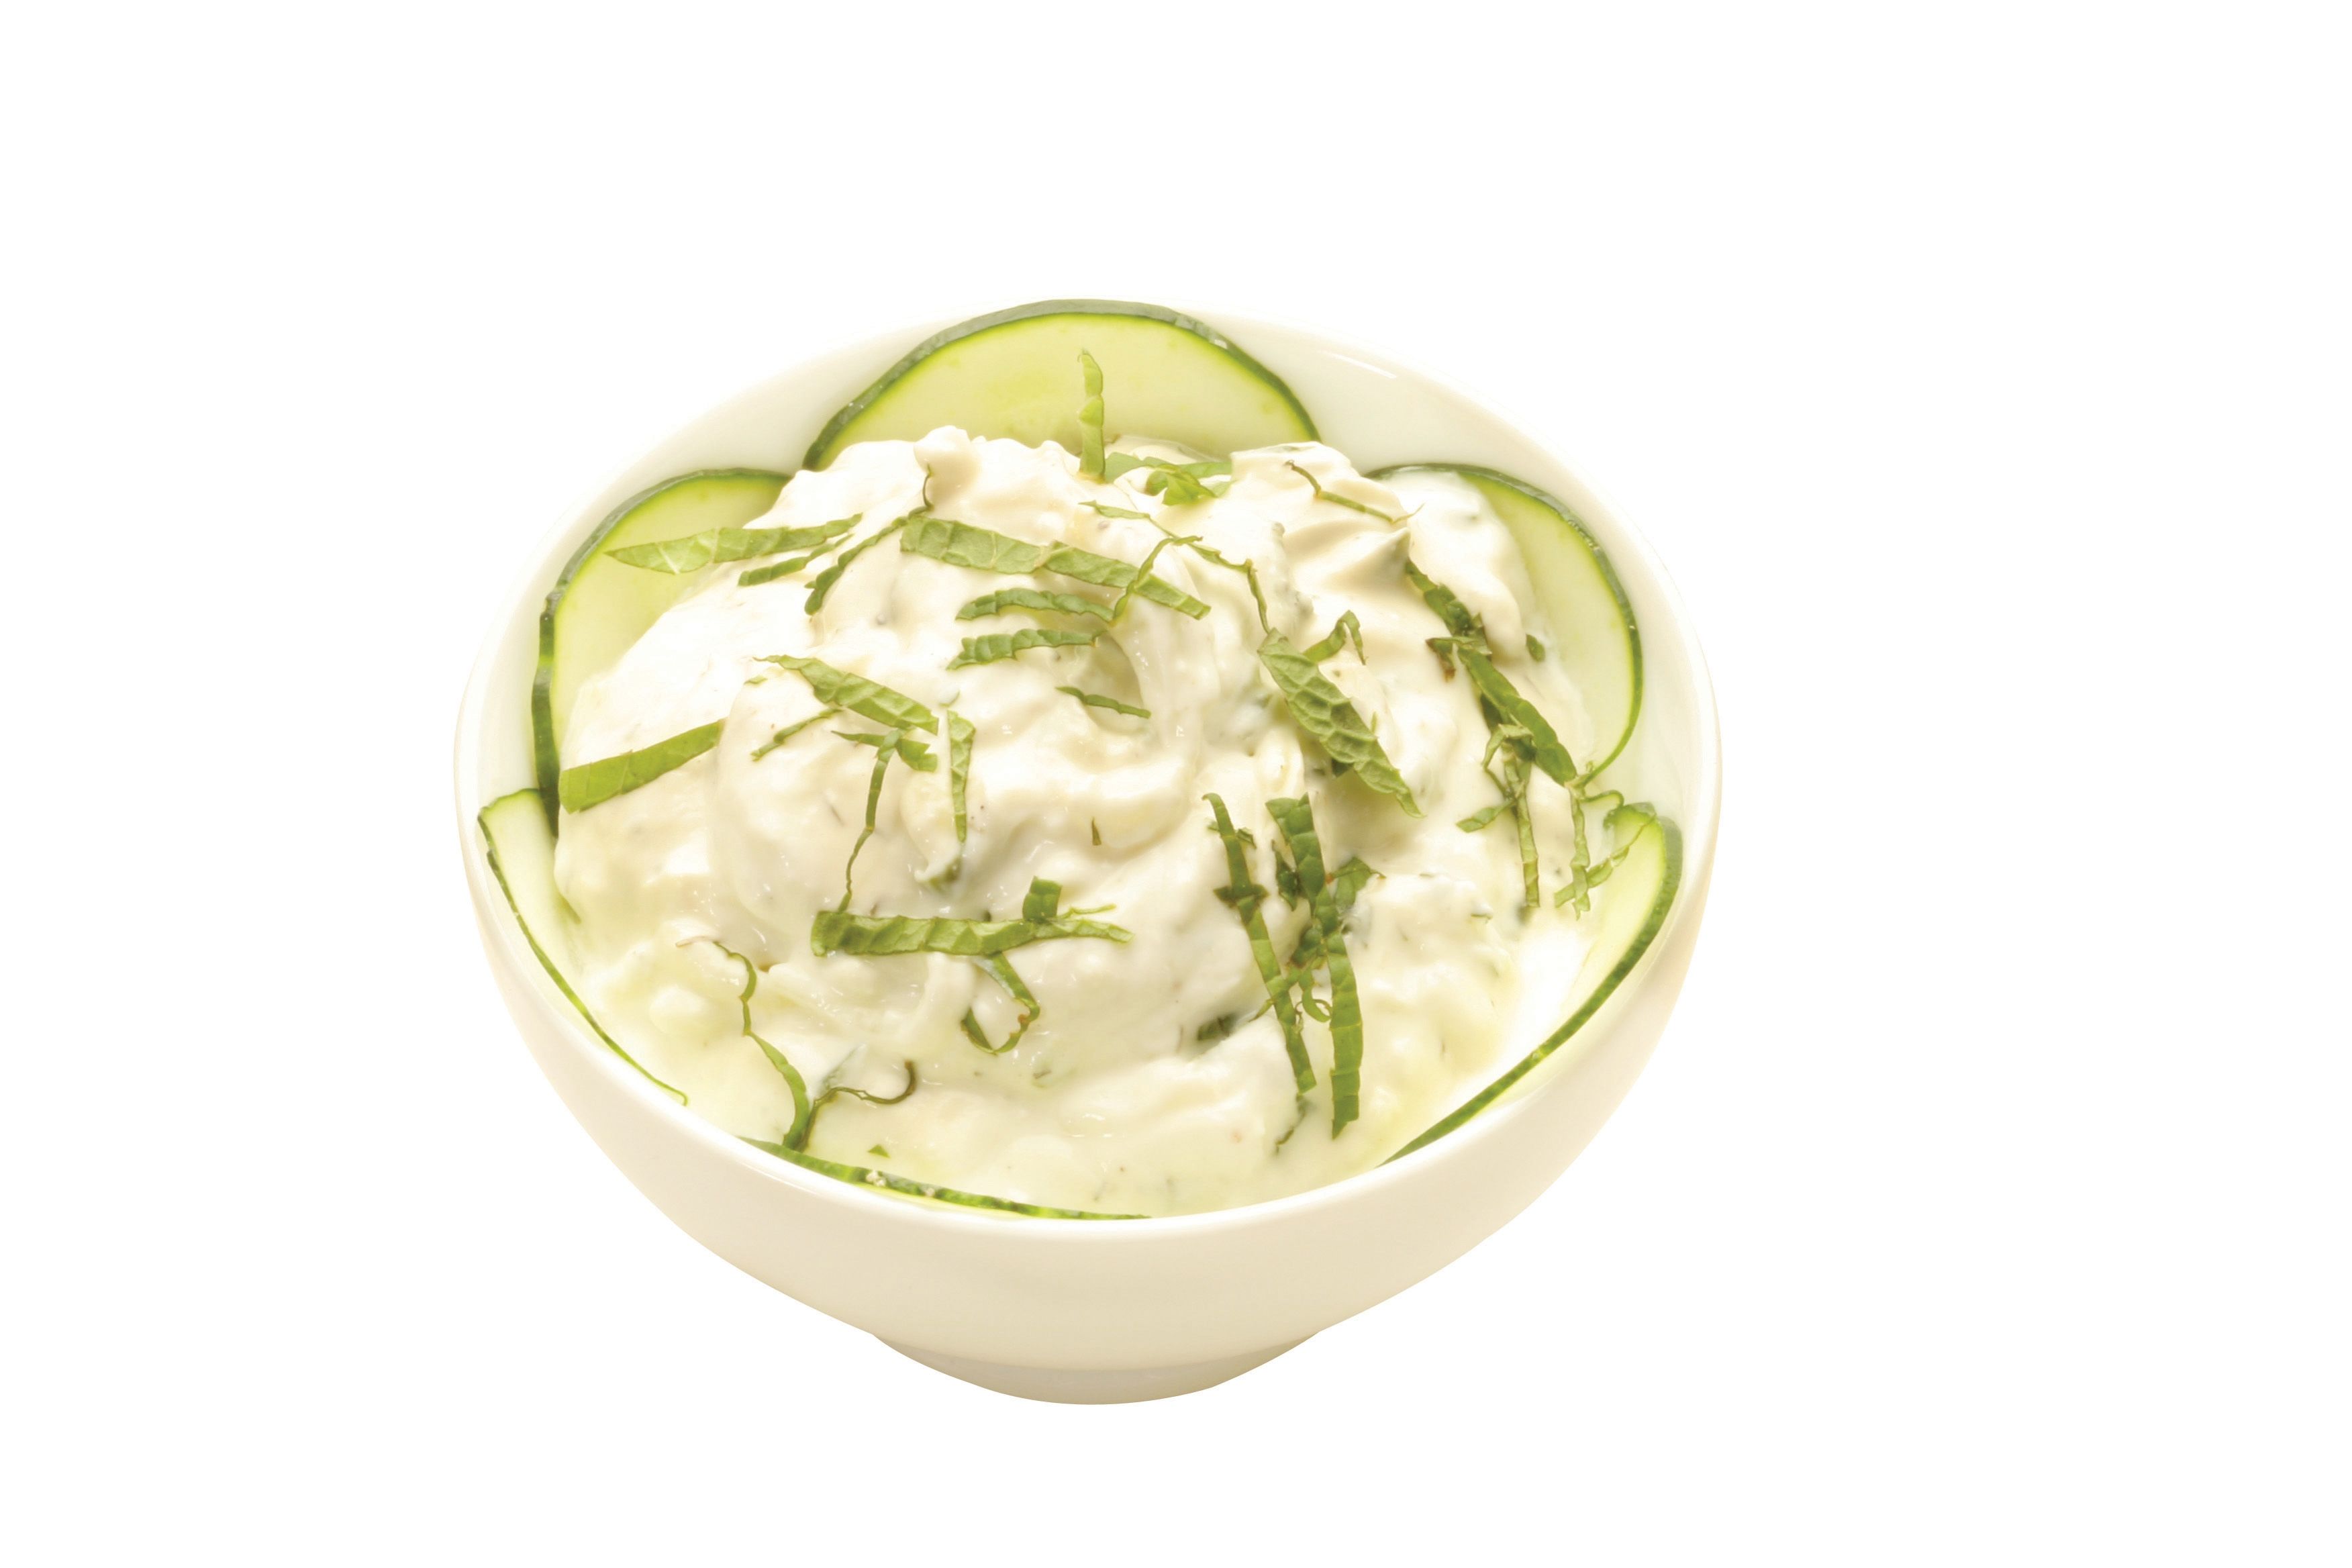 Mashed potatoes with cucumber. | Source: Getty Images